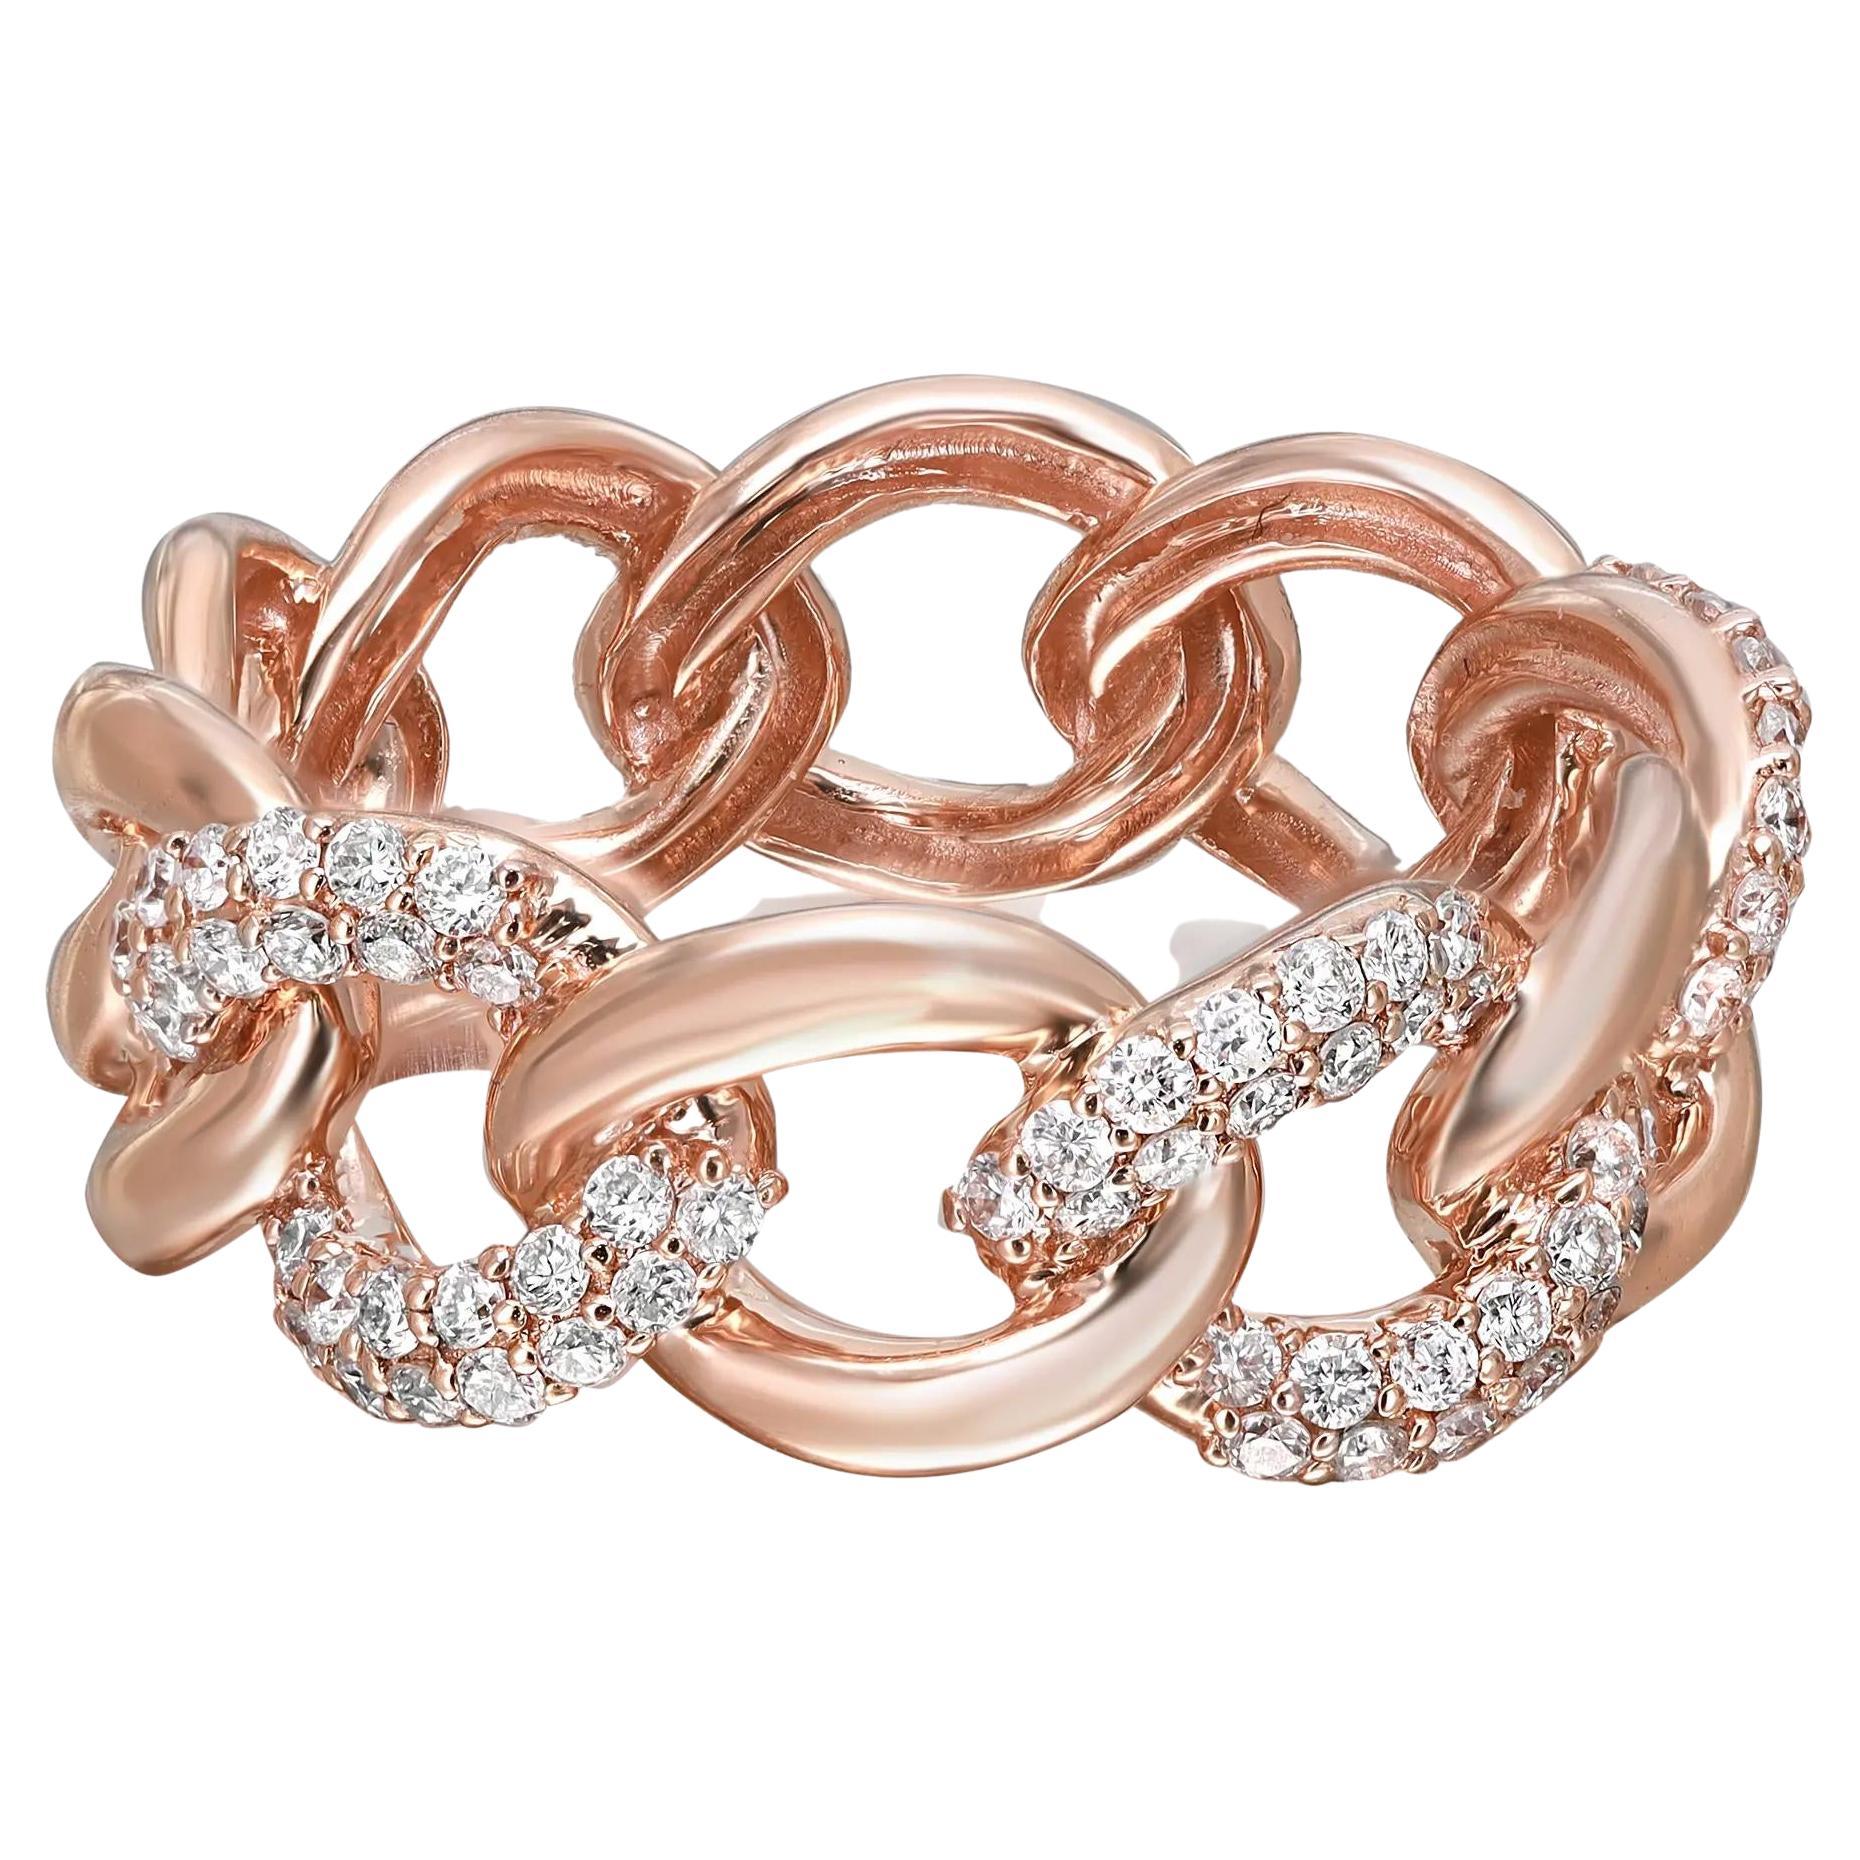 Idylle blossom pink gold ring Louis Vuitton Gold size 5 ¼ US in